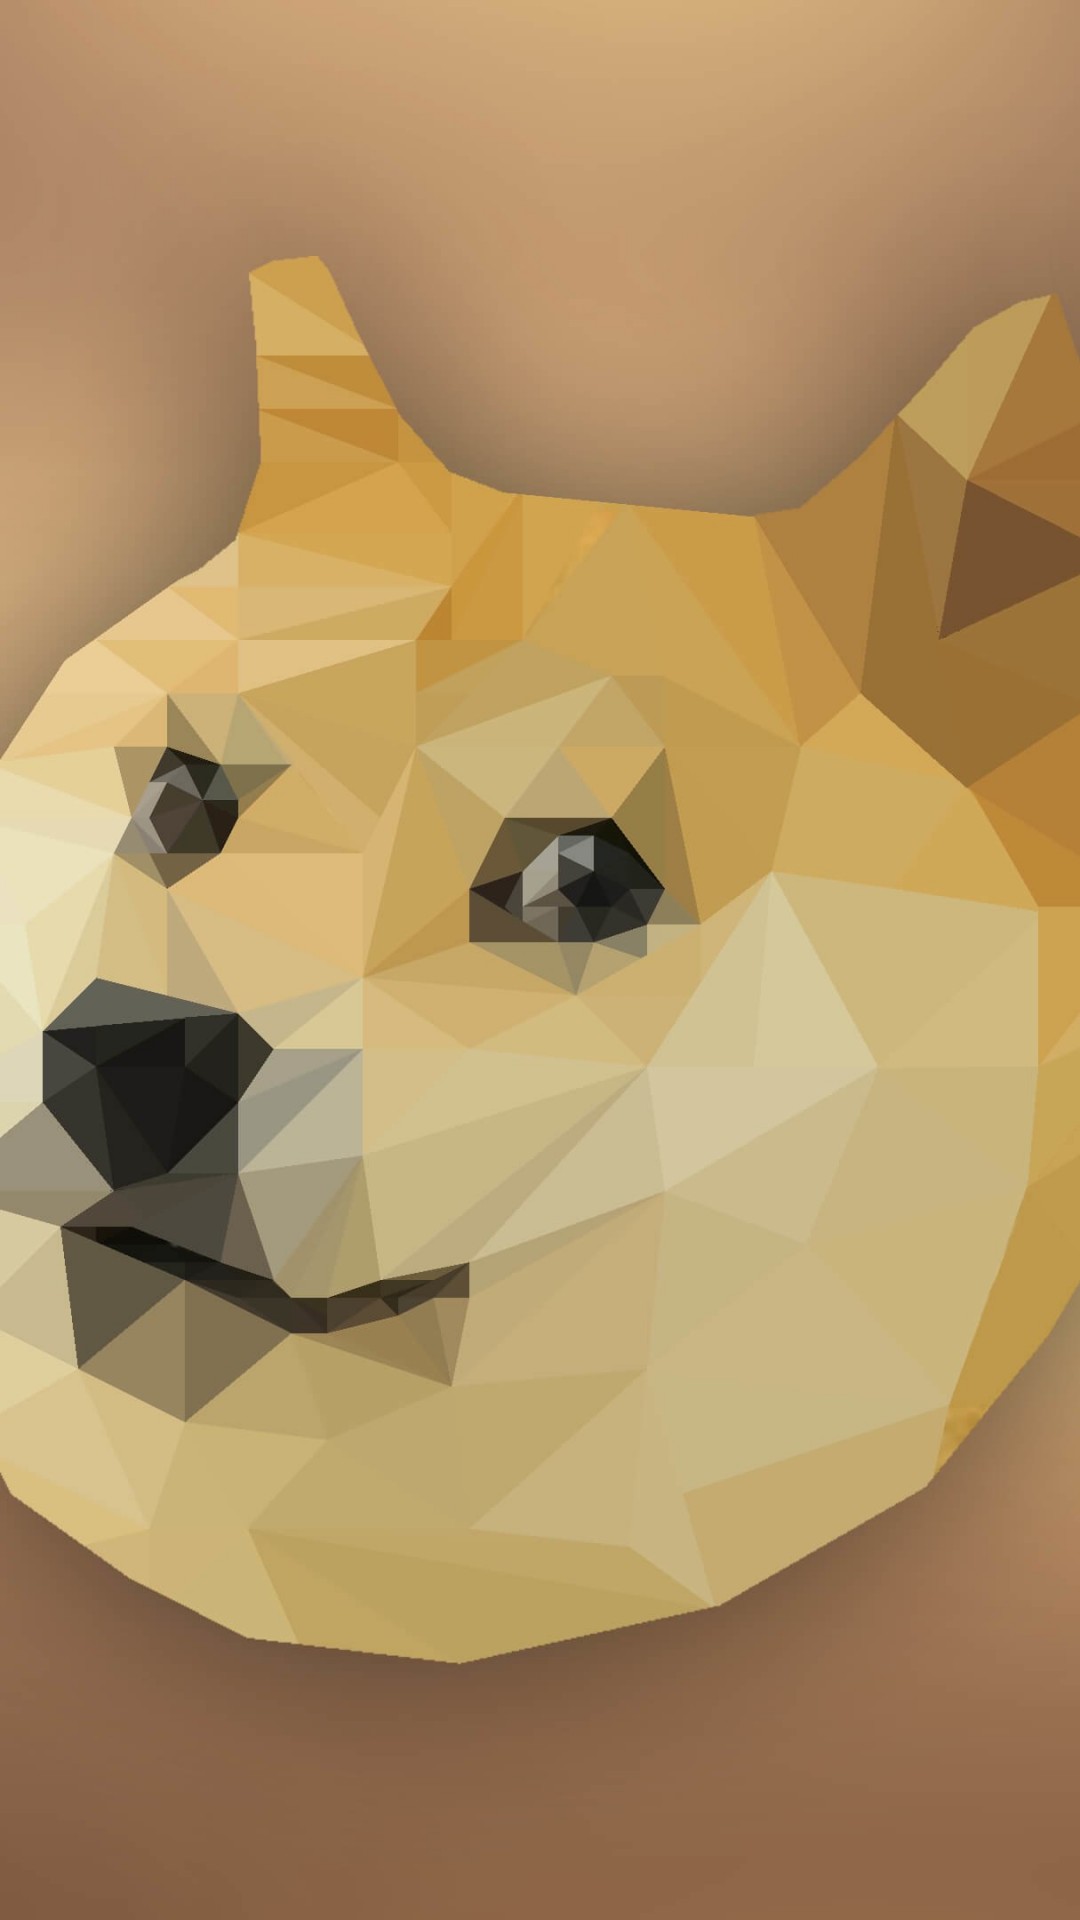 Low Poly Doge Wallpaper for SAMSUNG Galaxy S4